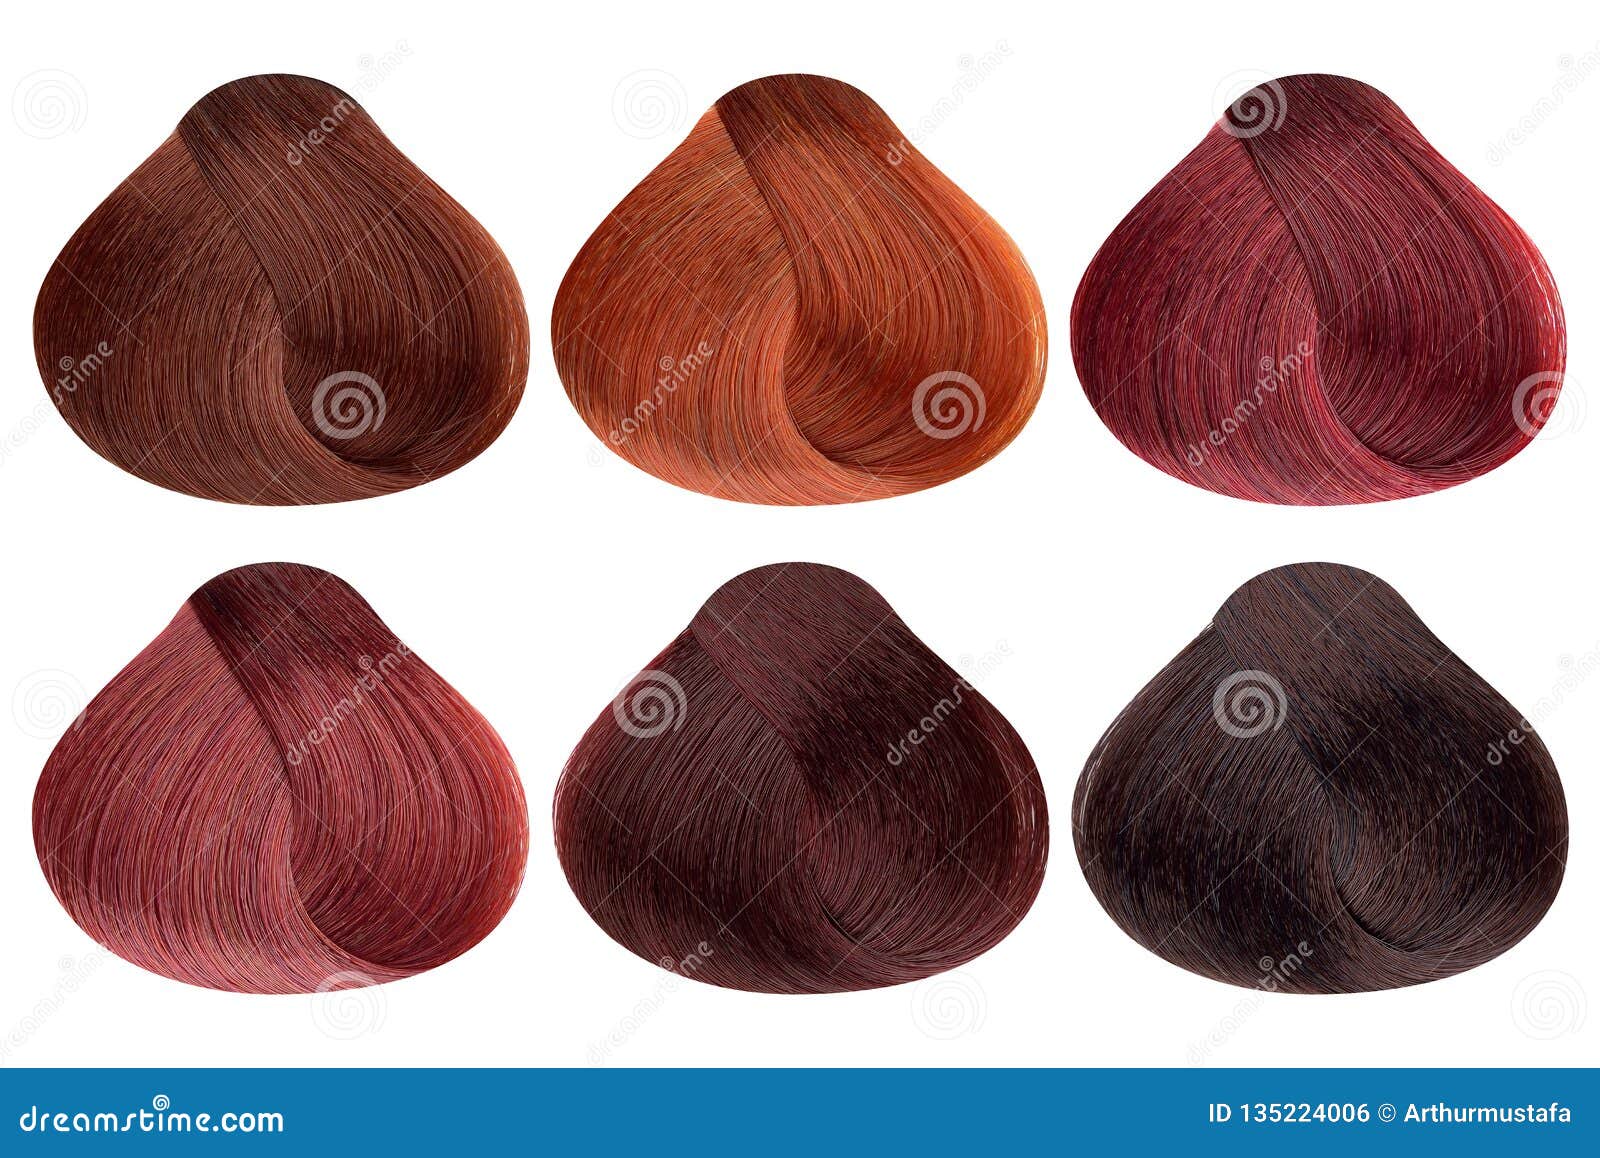 Set Of Locks Of Six Different Red Hair Color Samples X28